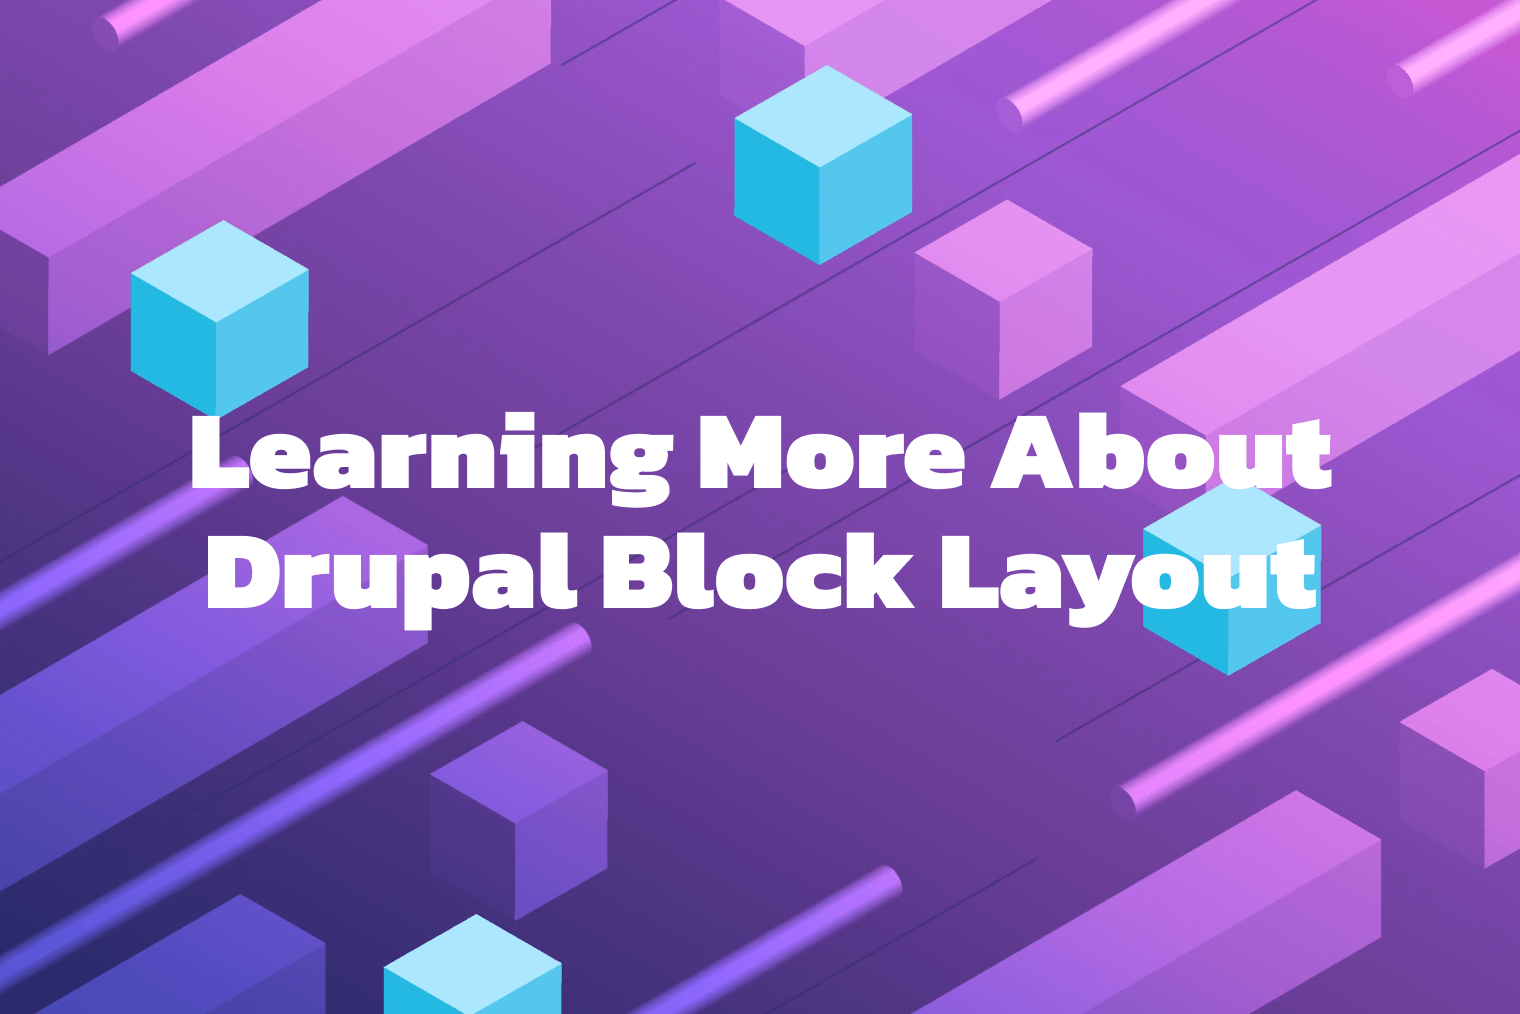 Learning More About Drupal Block Layout image